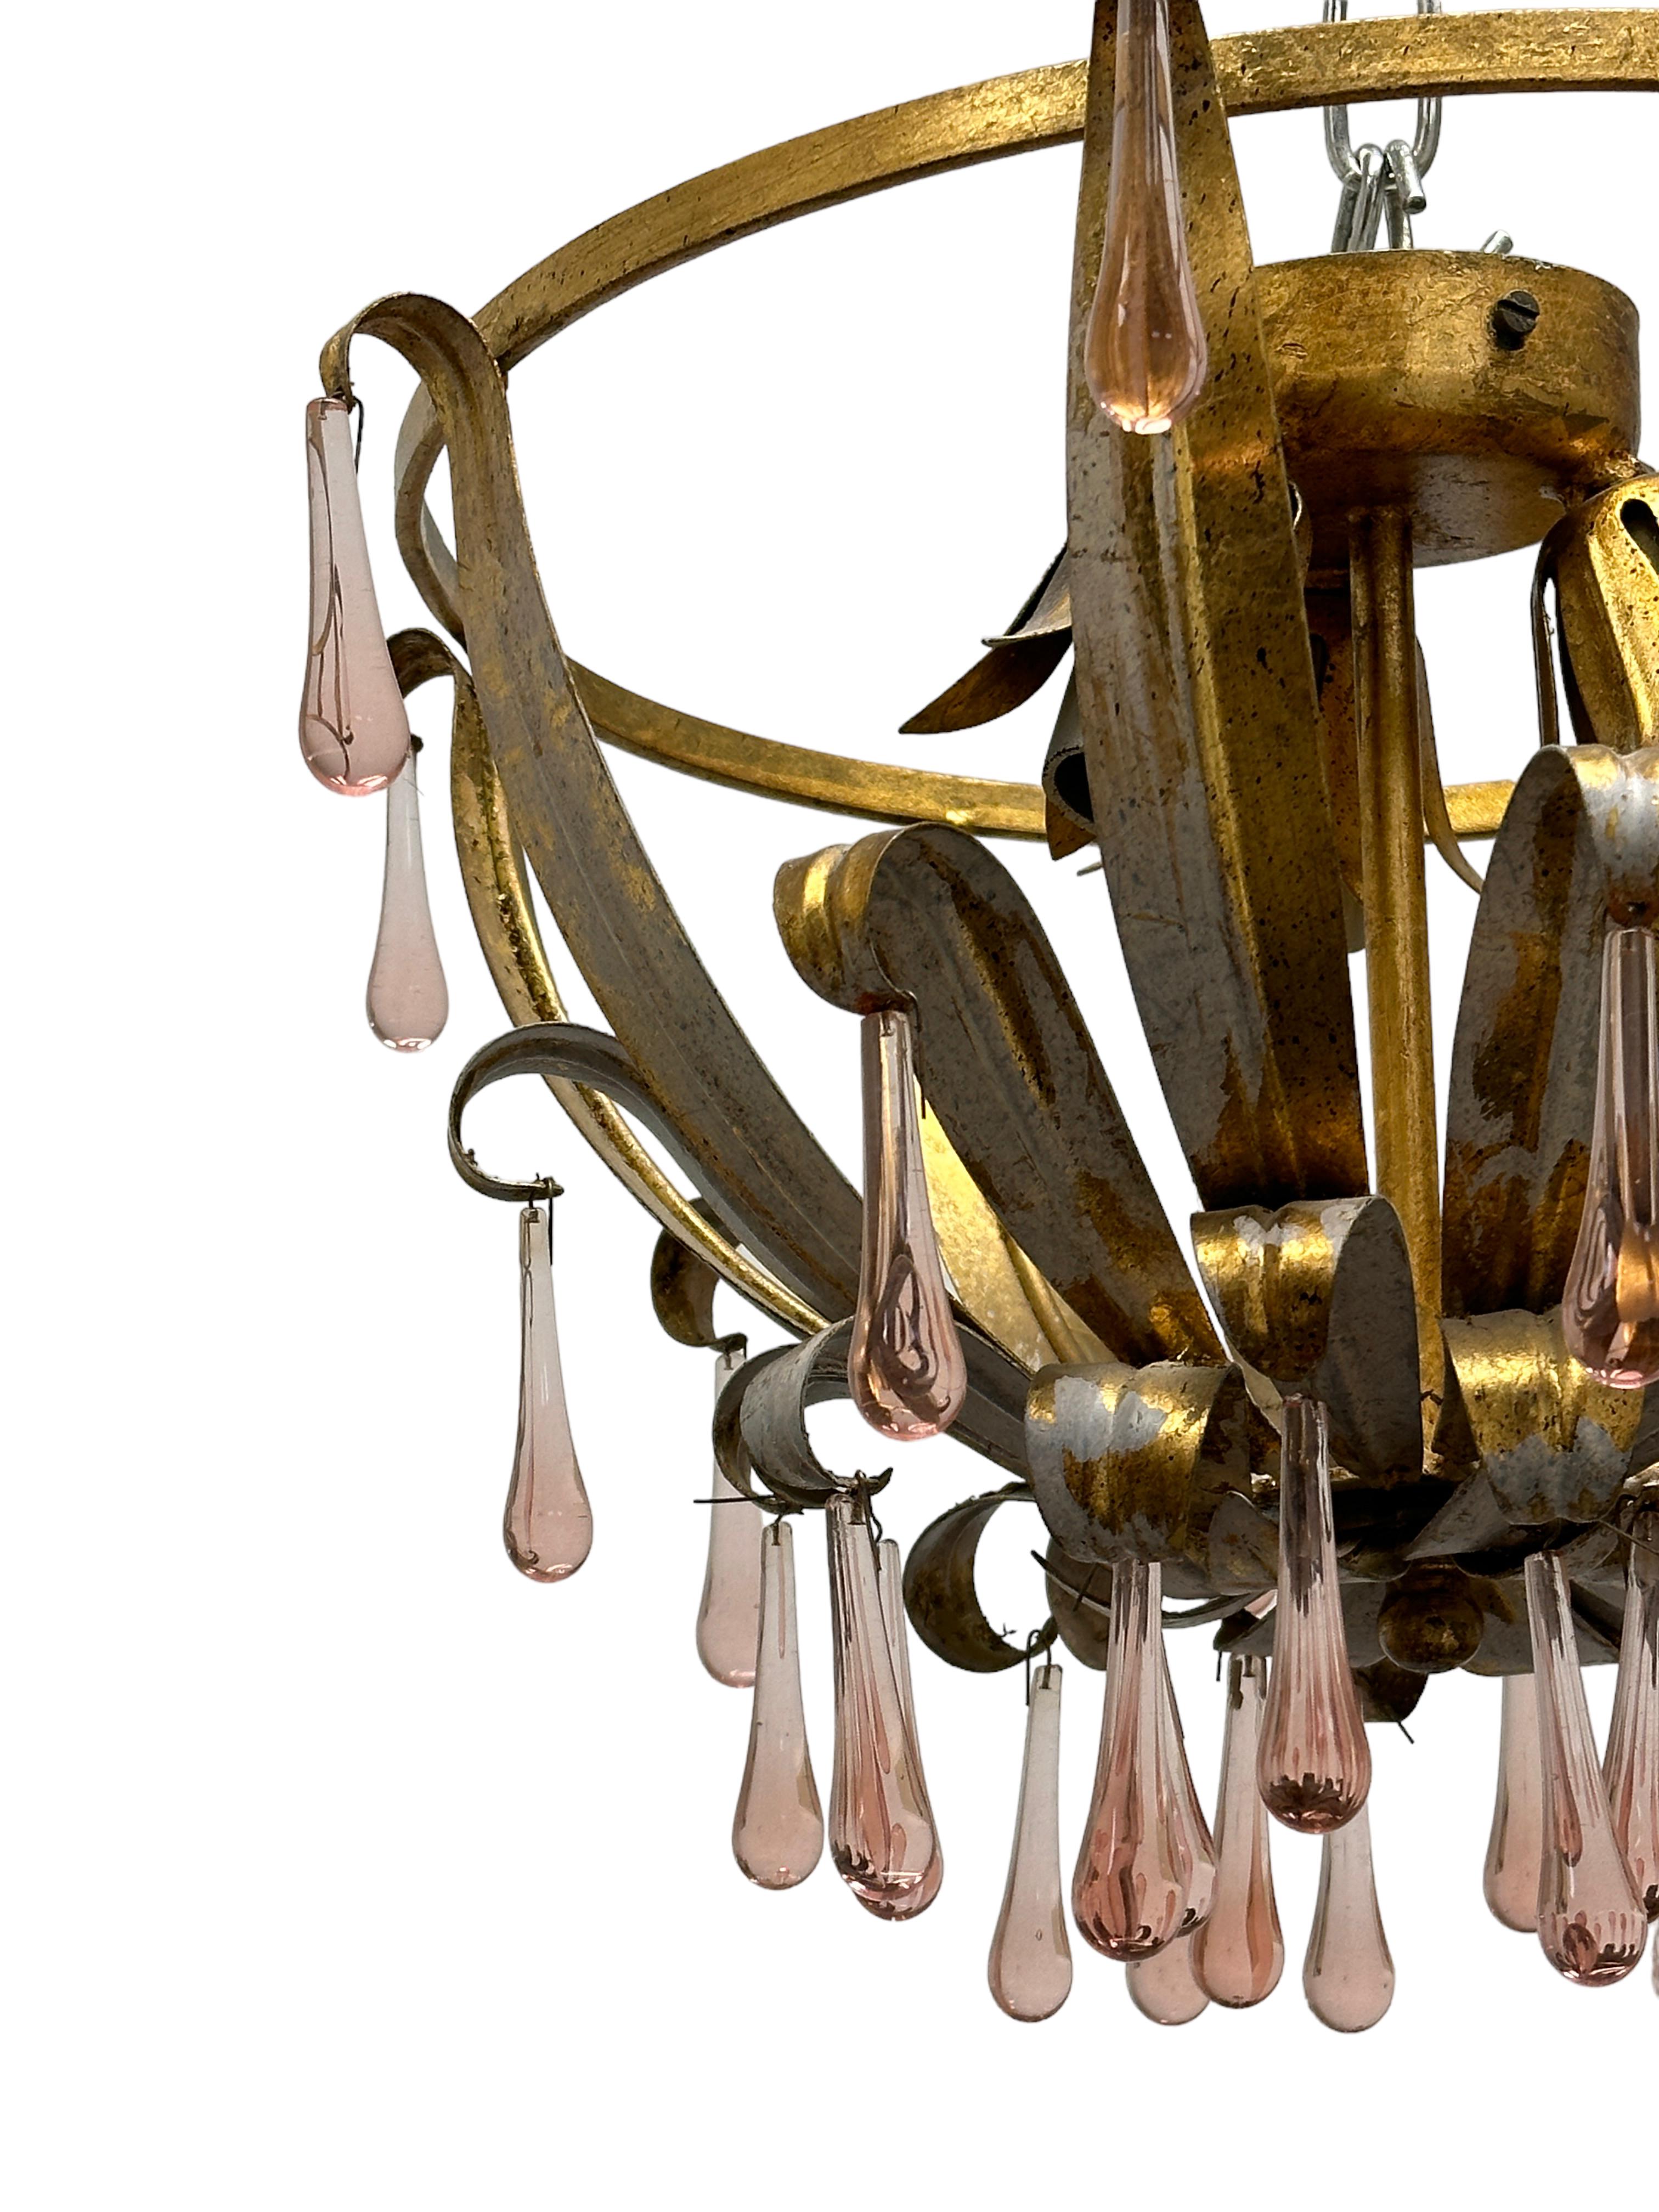 Add a touch of opulence to your home with this charming flush mount light. Perfect gilt metal leafs to enhance any chic or eclectic home. We'd love to see it hanging in an entryway as a charming welcome home. Built in the 1960s, made by Koegl